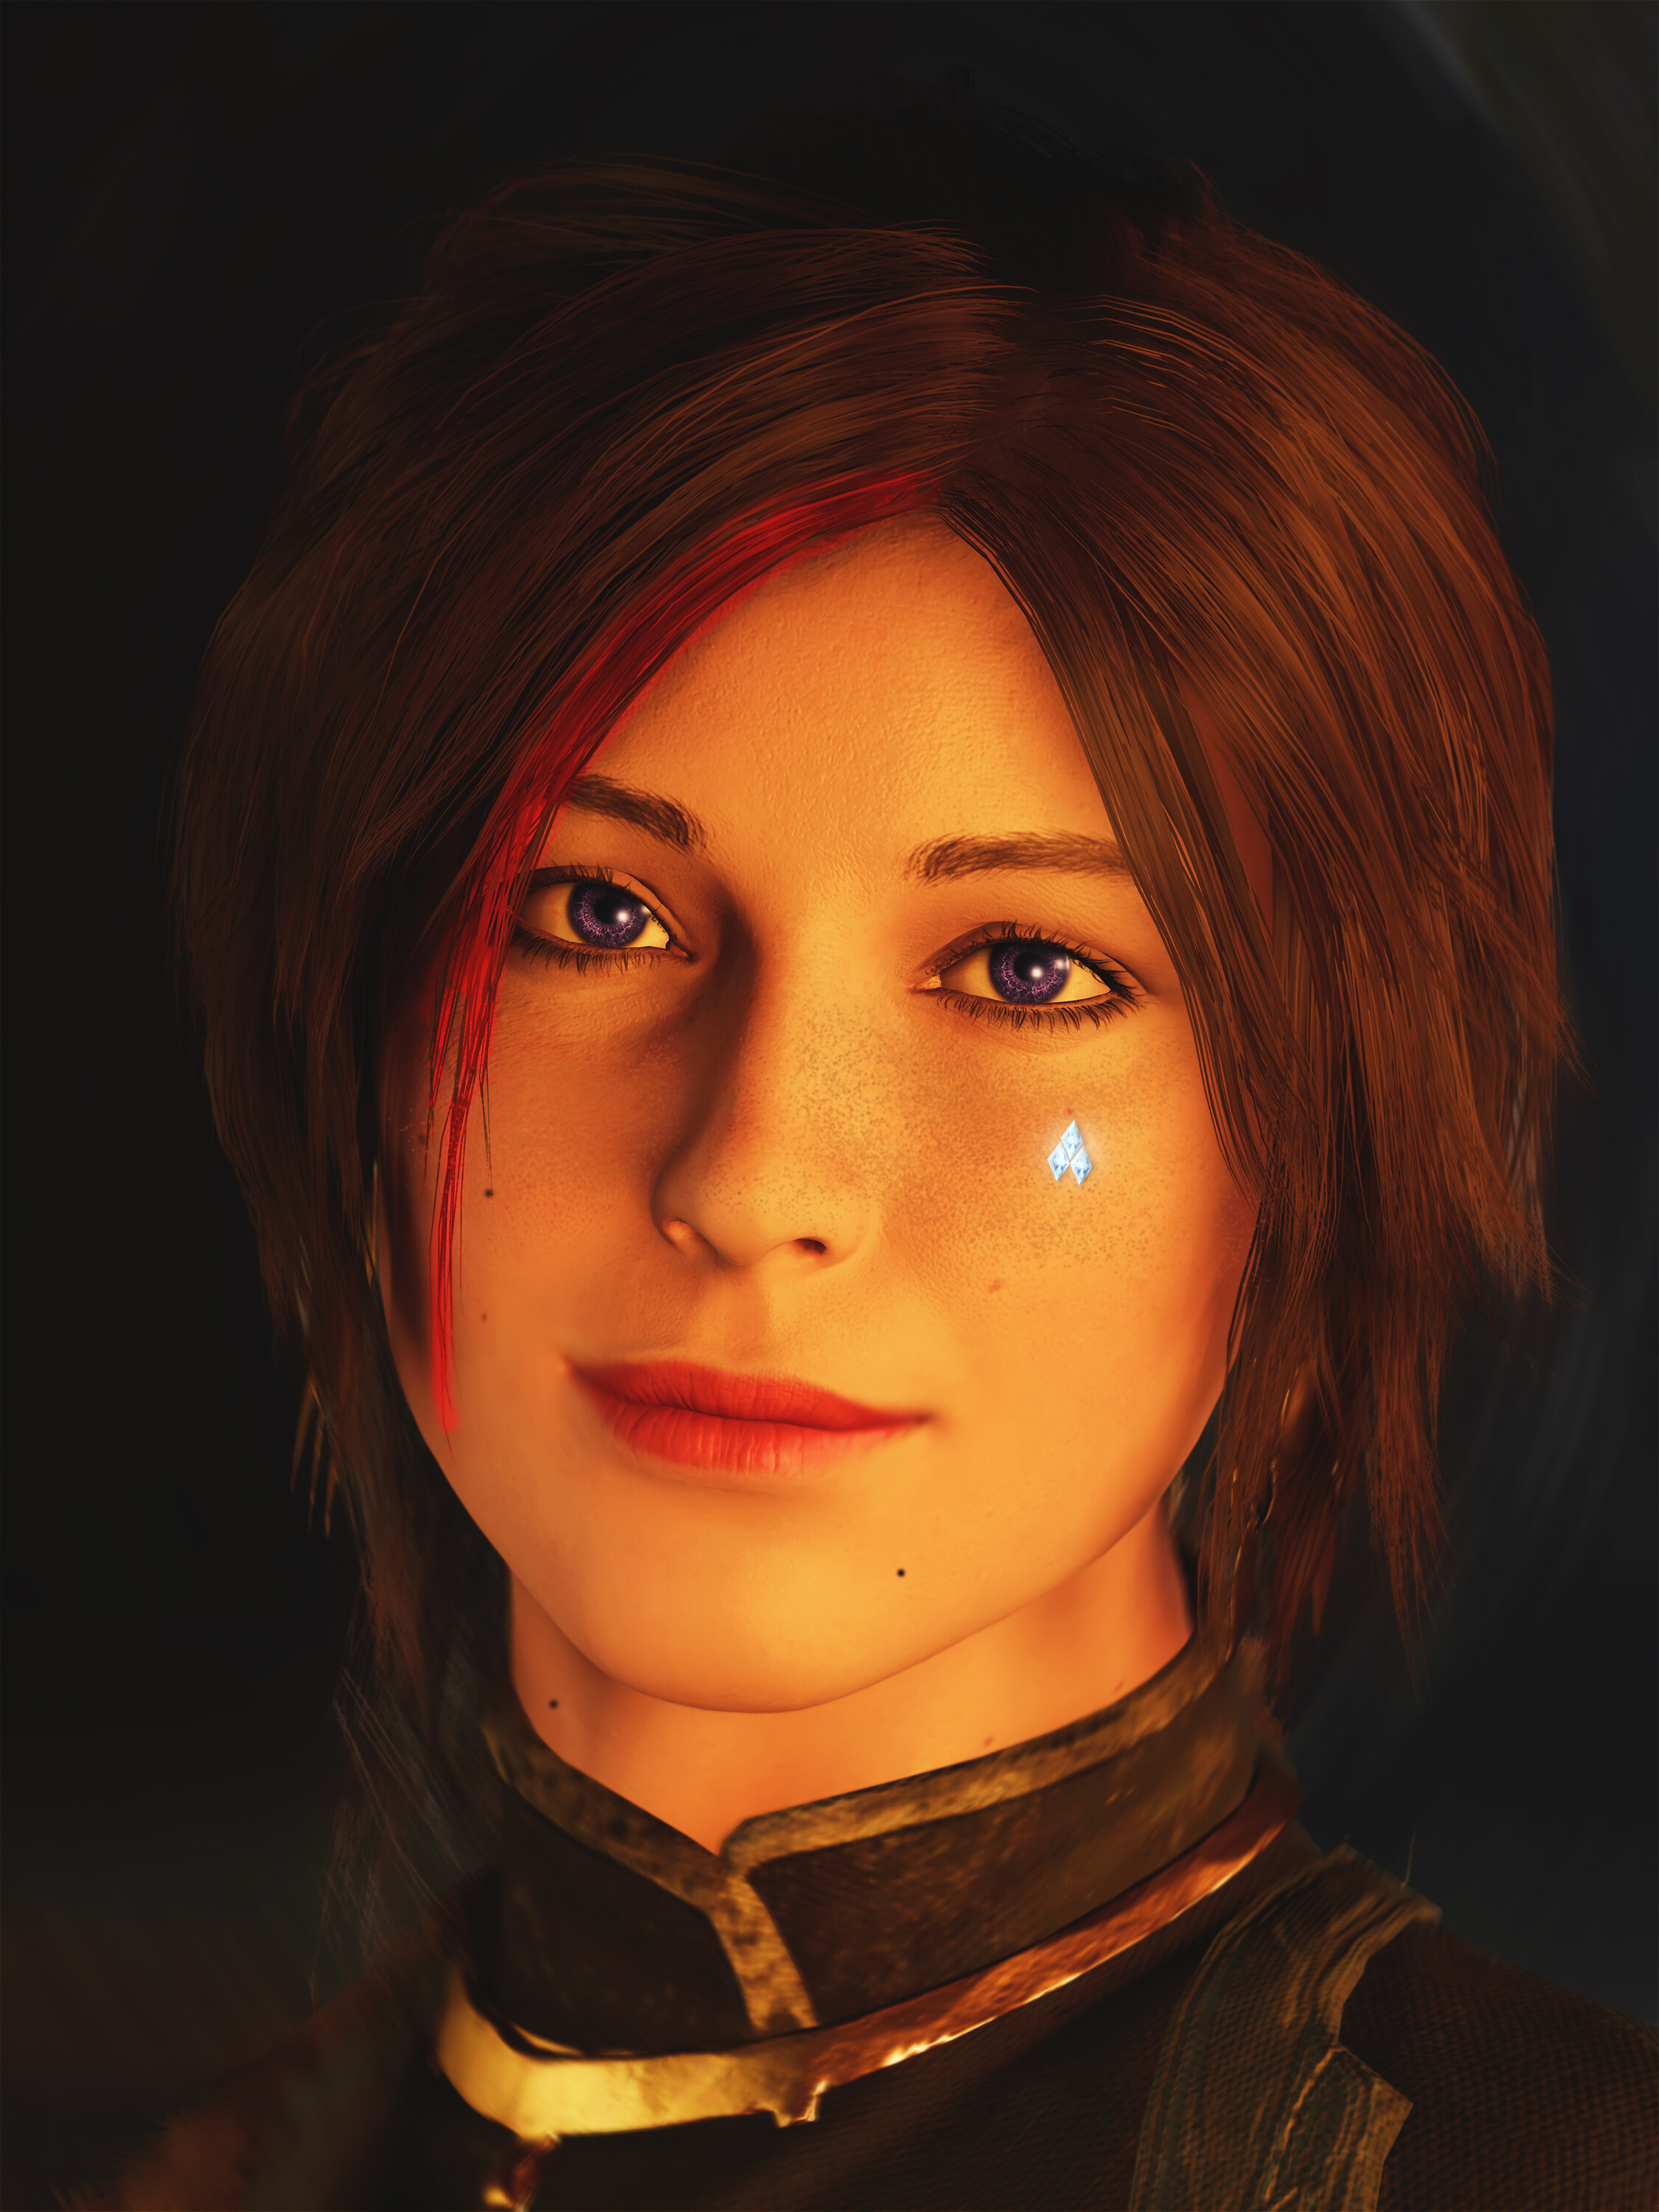 General 2250x3000 Shadow of the Tomb Raider Tomb Raider reshade Lara Croft (Tomb Raider) face purple eyes redhead video game girls video game characters red lipstick video games PC gaming